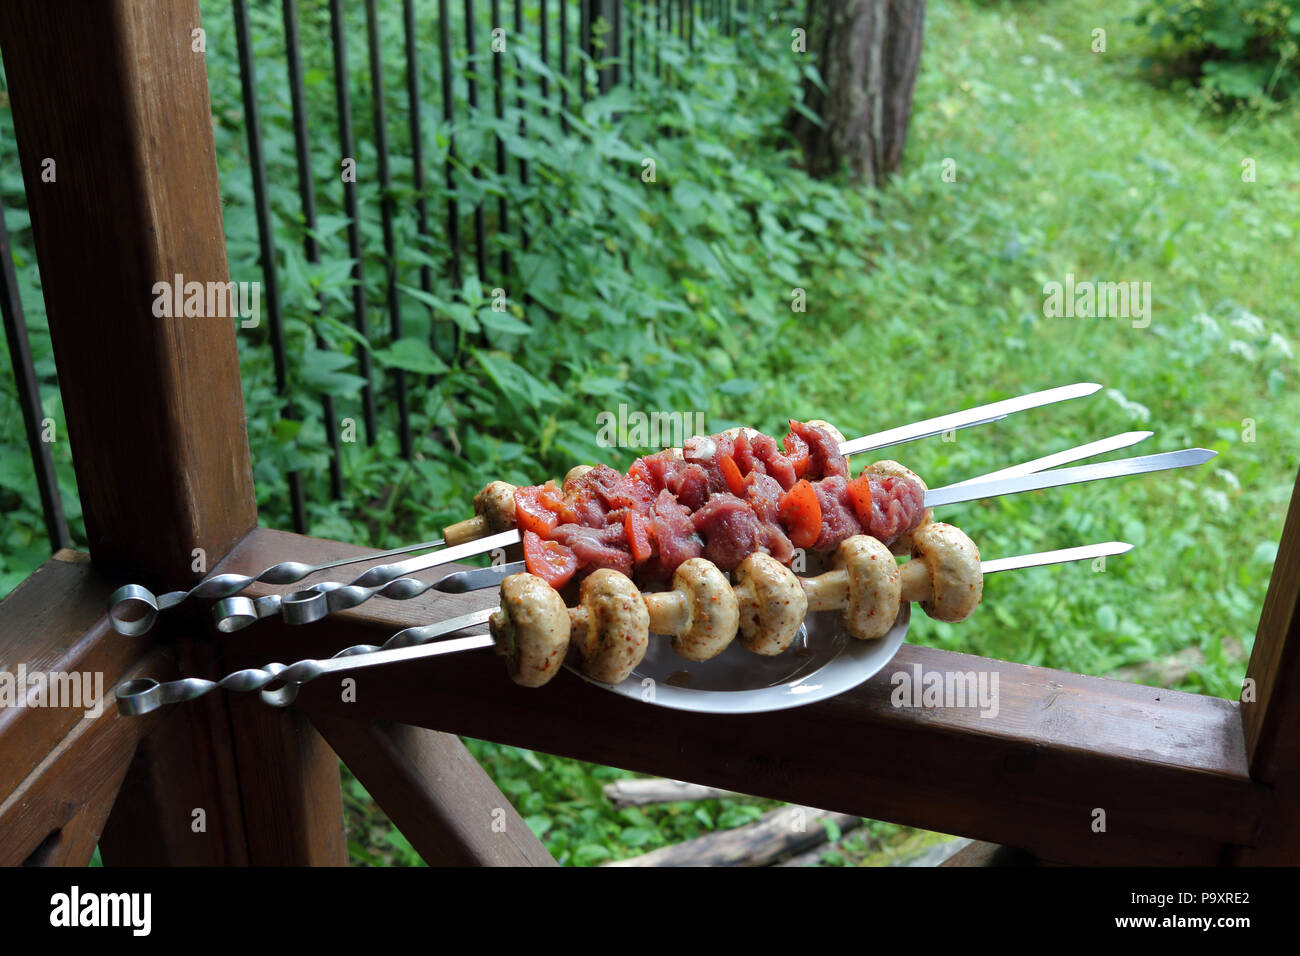 Kebab and mushrooms on the skewers ready to fry closeup photo Stock Photo